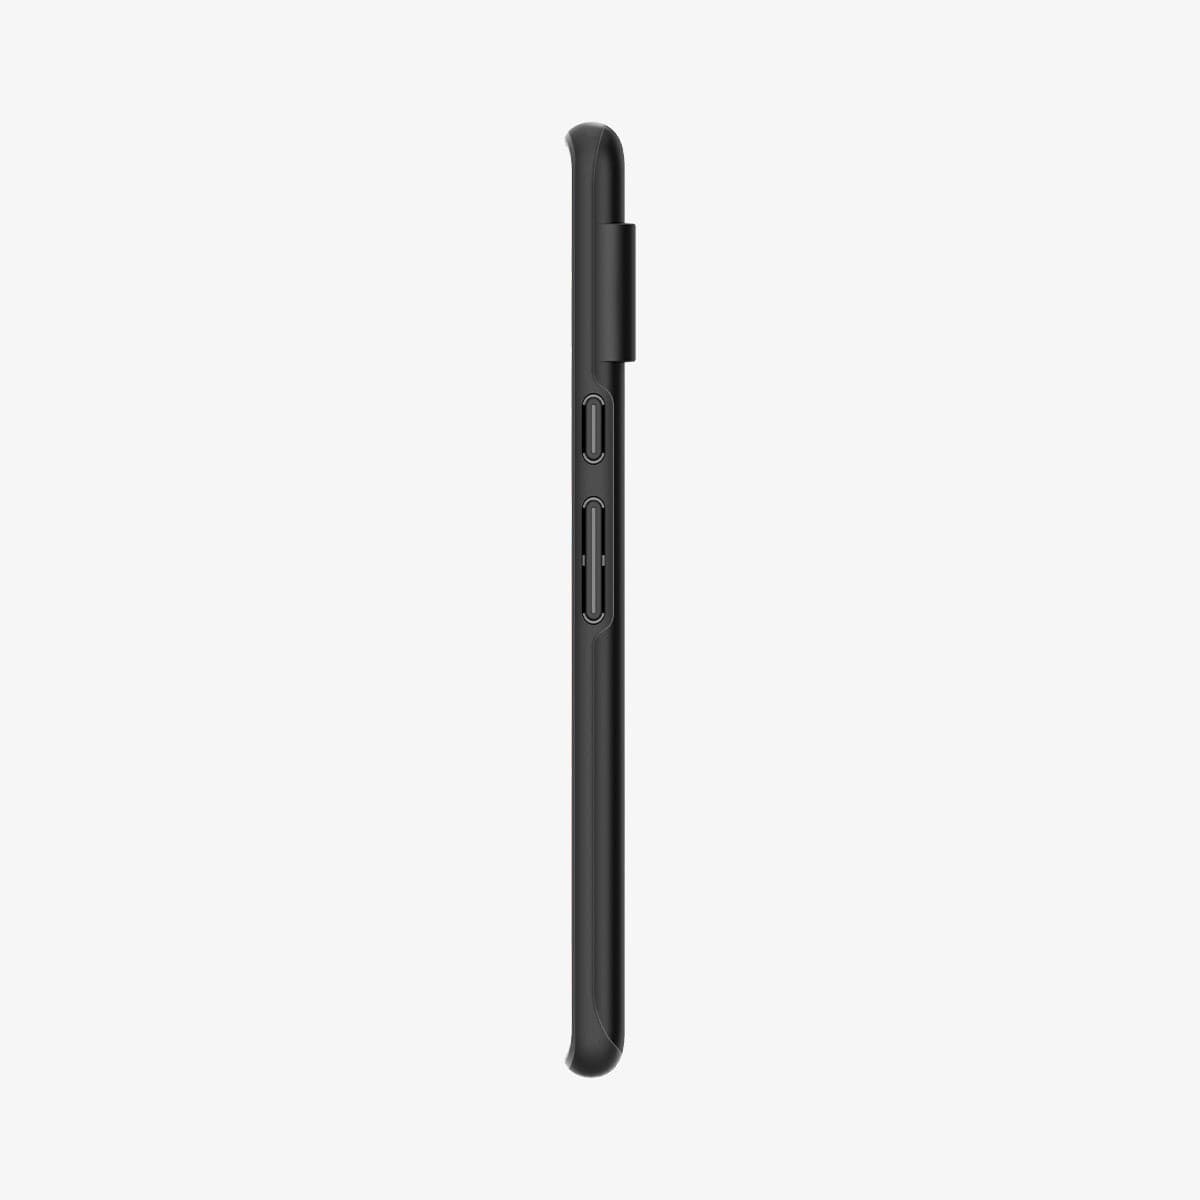 ACS03454 - Pixel 6 Pro Case Thin Fit in black showing the side with volume controls